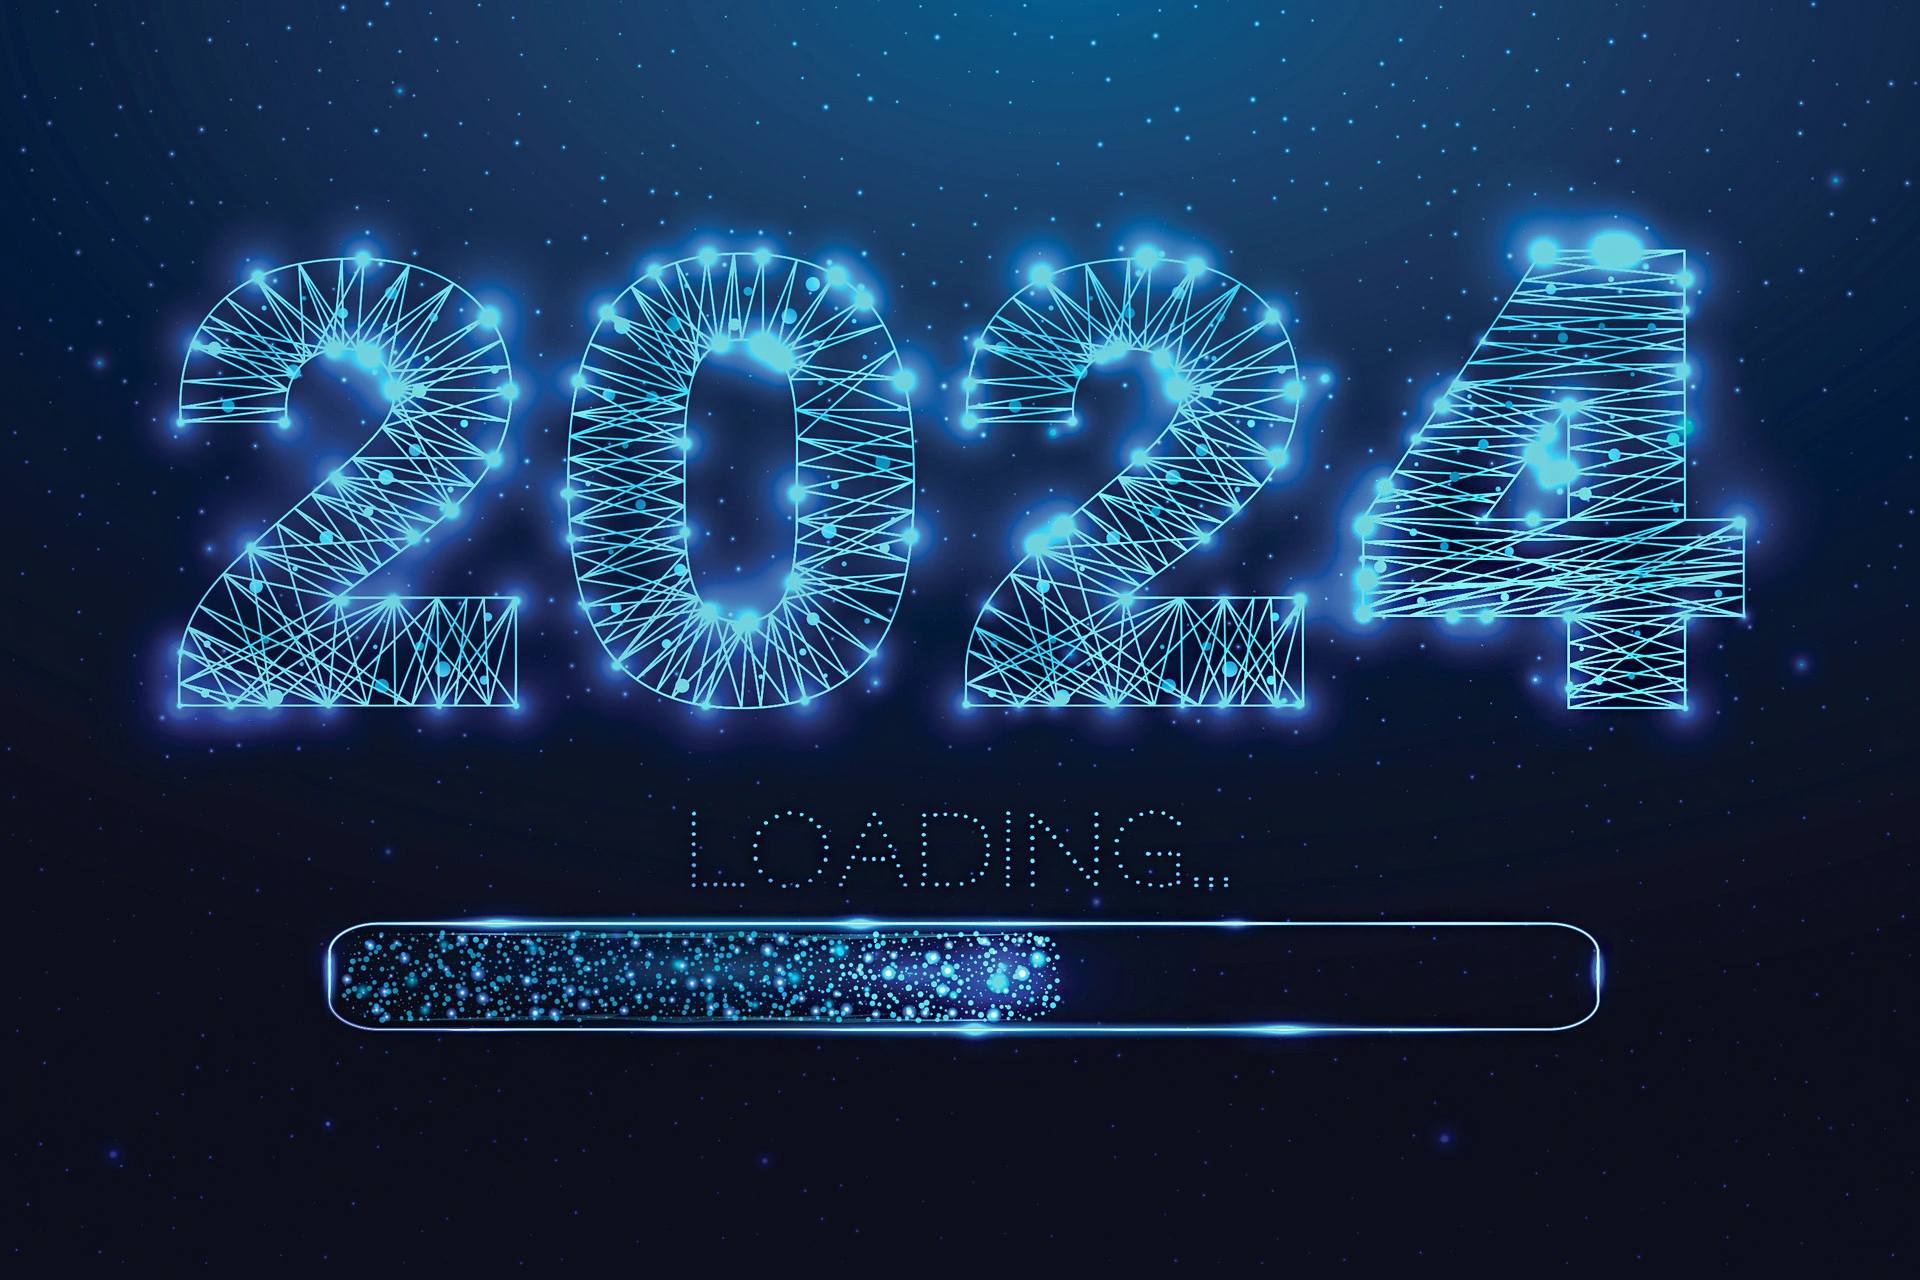 new year 2024 loading loading bar low poly style design numbers from a polygonal wireframe mesh abstract illustration on dark background vector